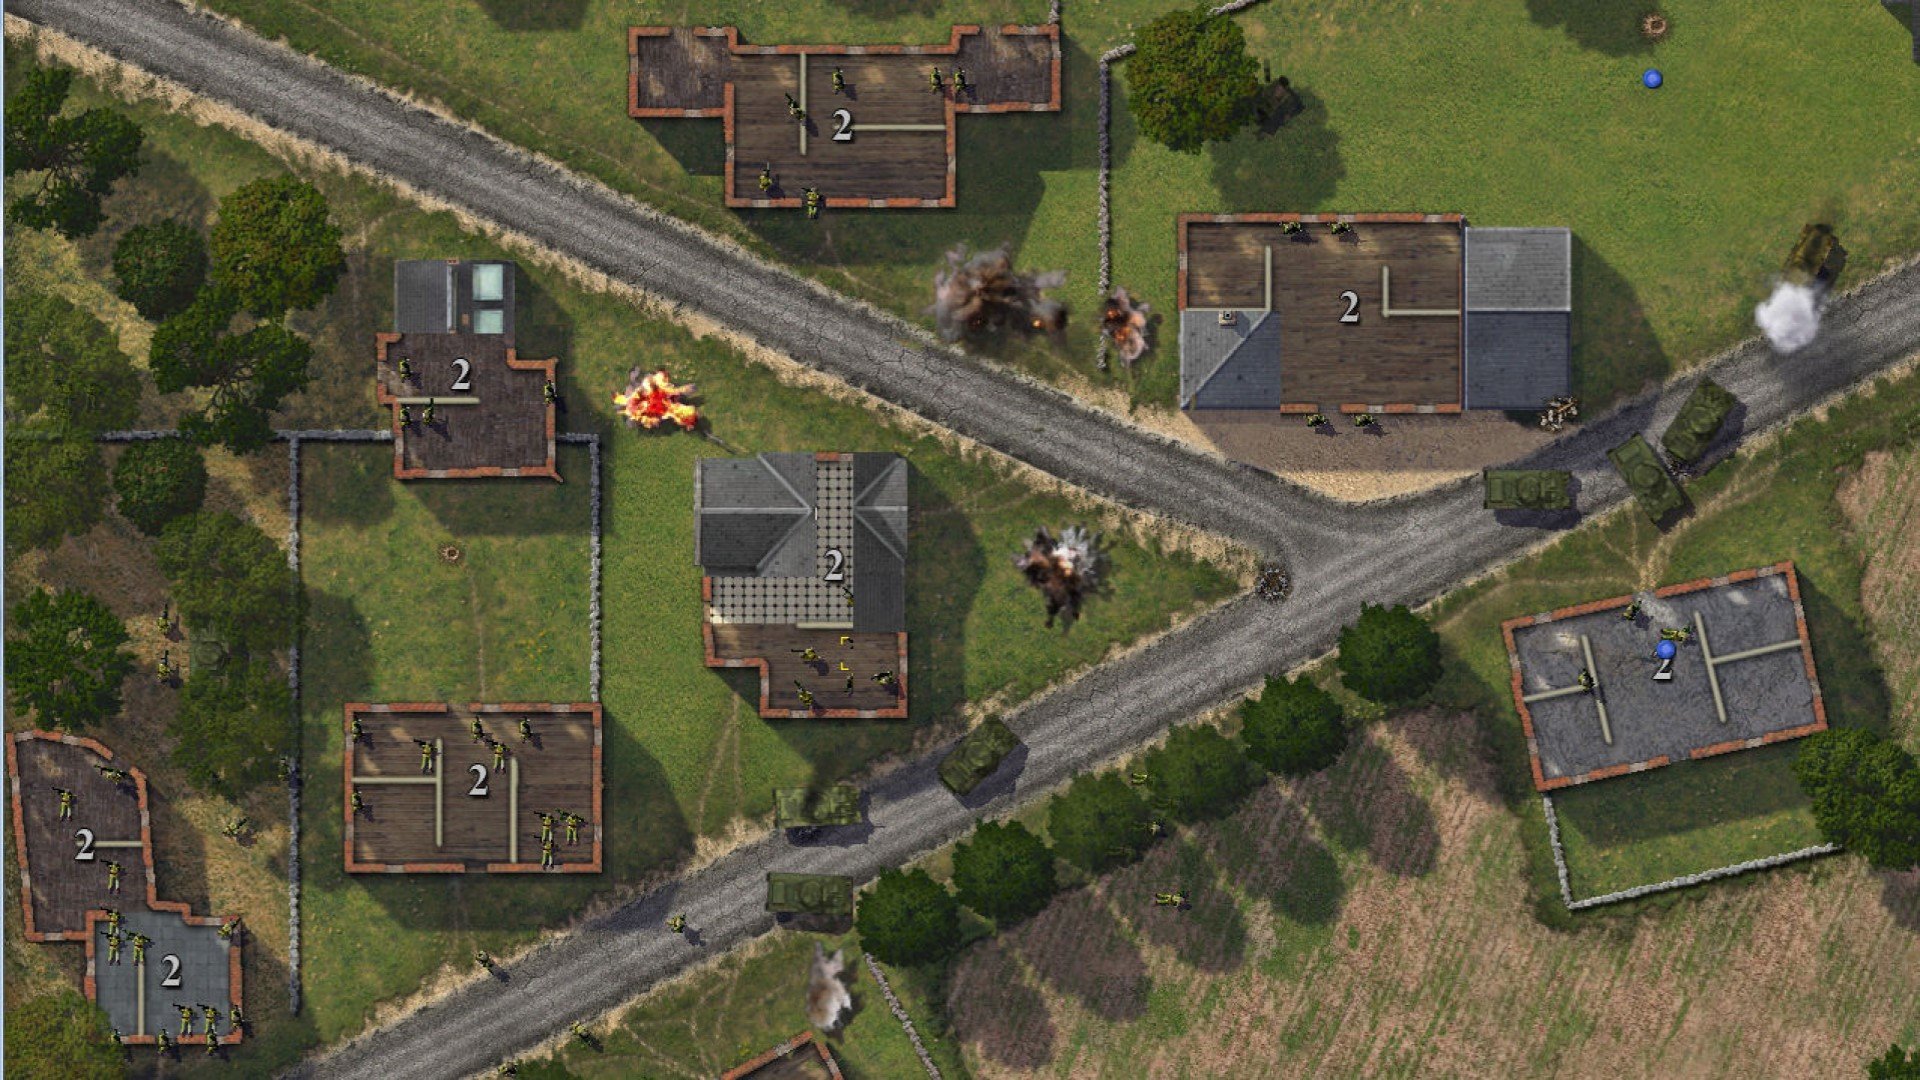 Best WW2 games - screenshot from Close Combat showing an aerial view of a village with opposing squads in position in several buildings